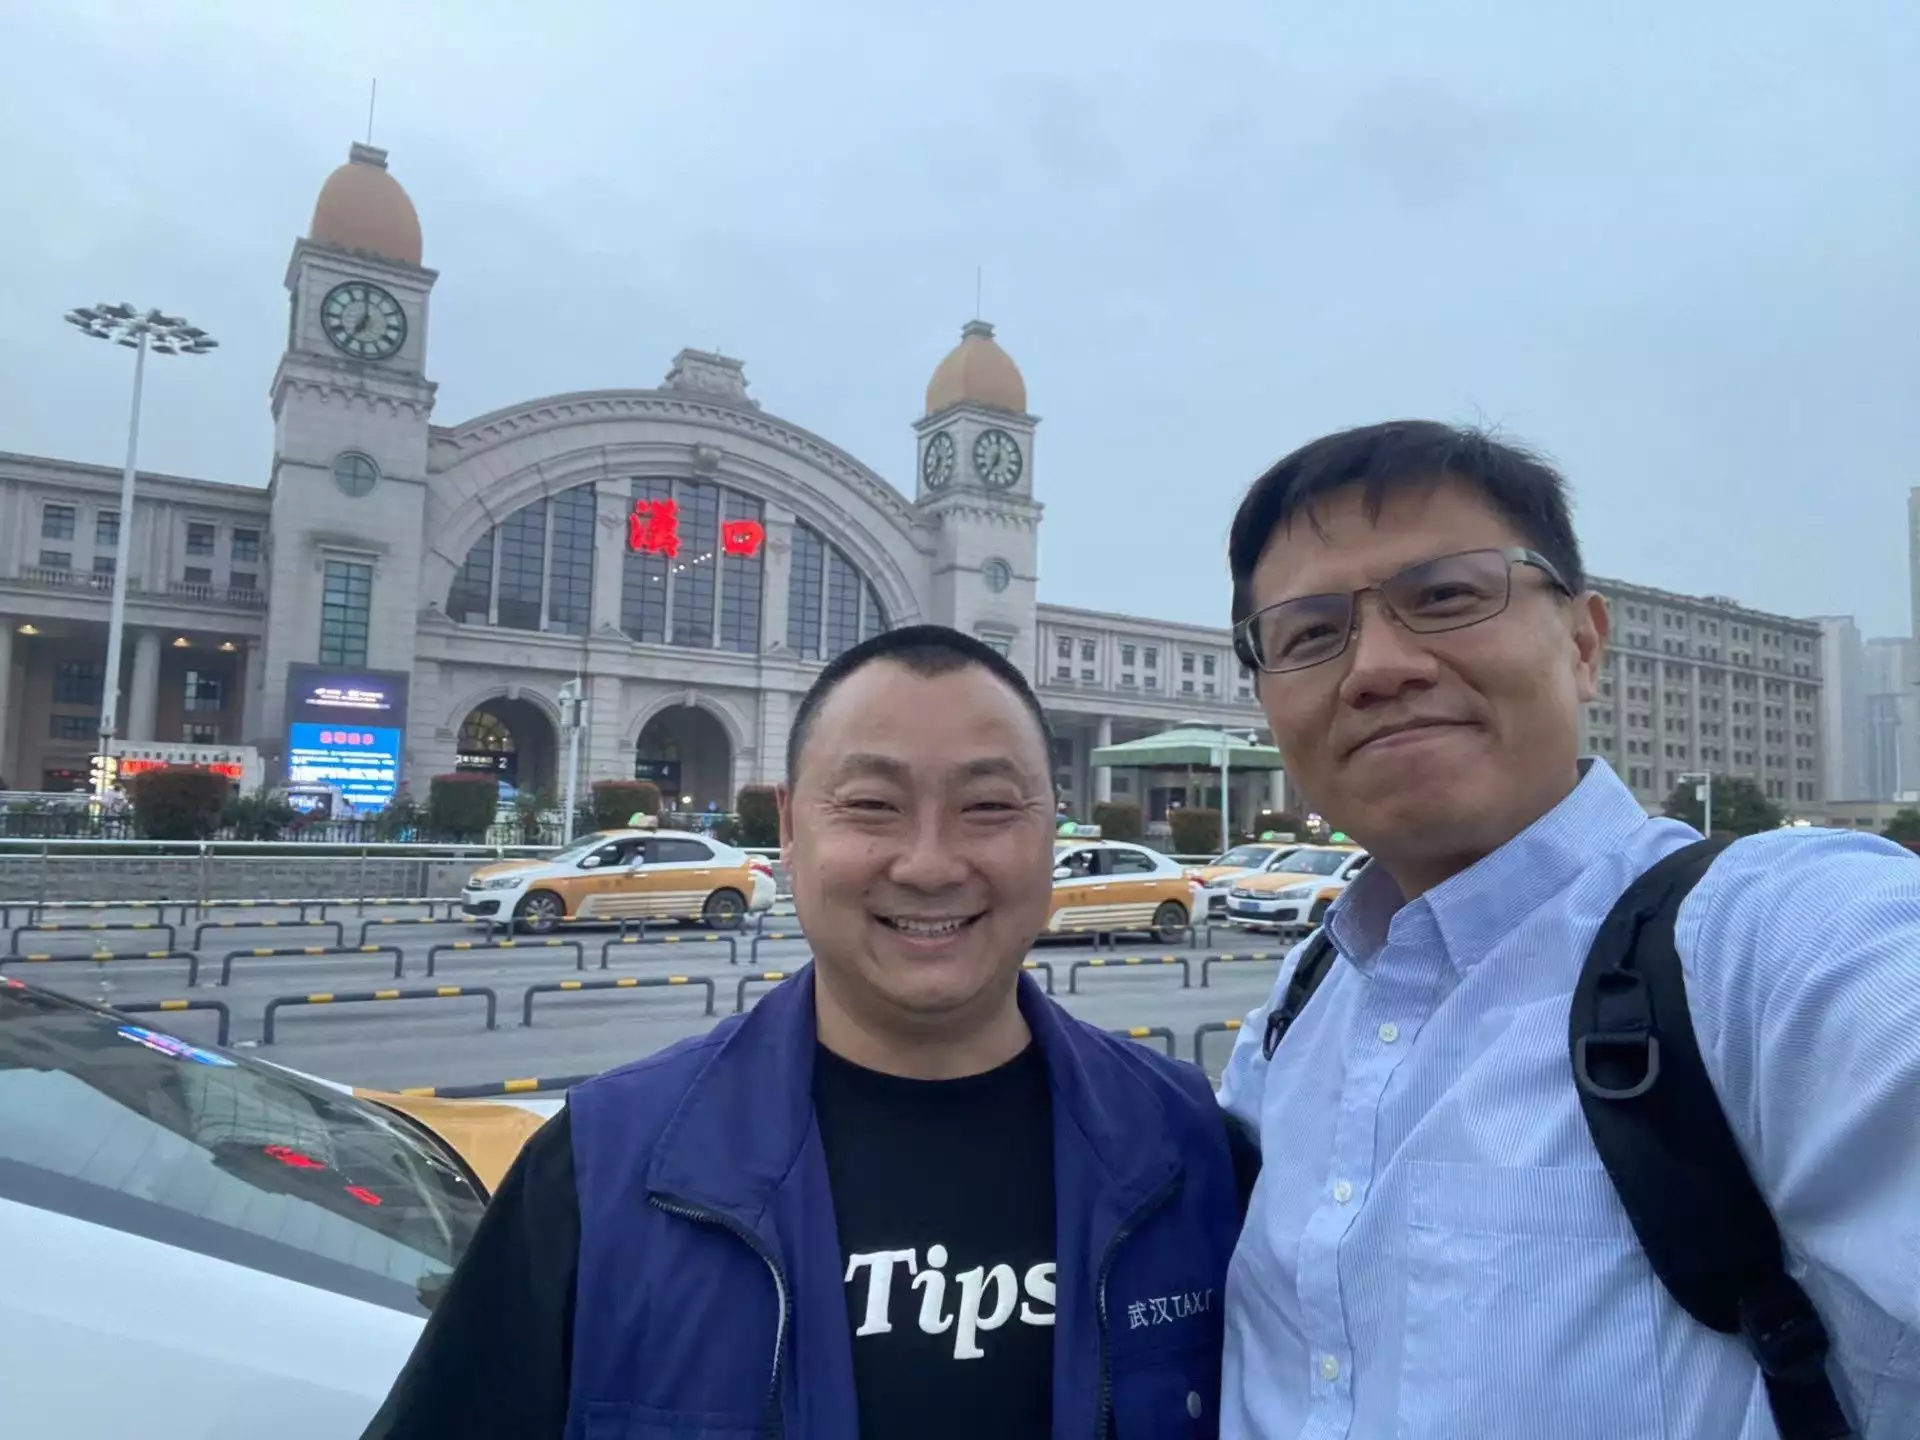 Wuhan's brother Chen Wanqing's Taiwanese customers are back： because of their thoughtful service to become friends, Wuhan uses a car to broadcast articles 